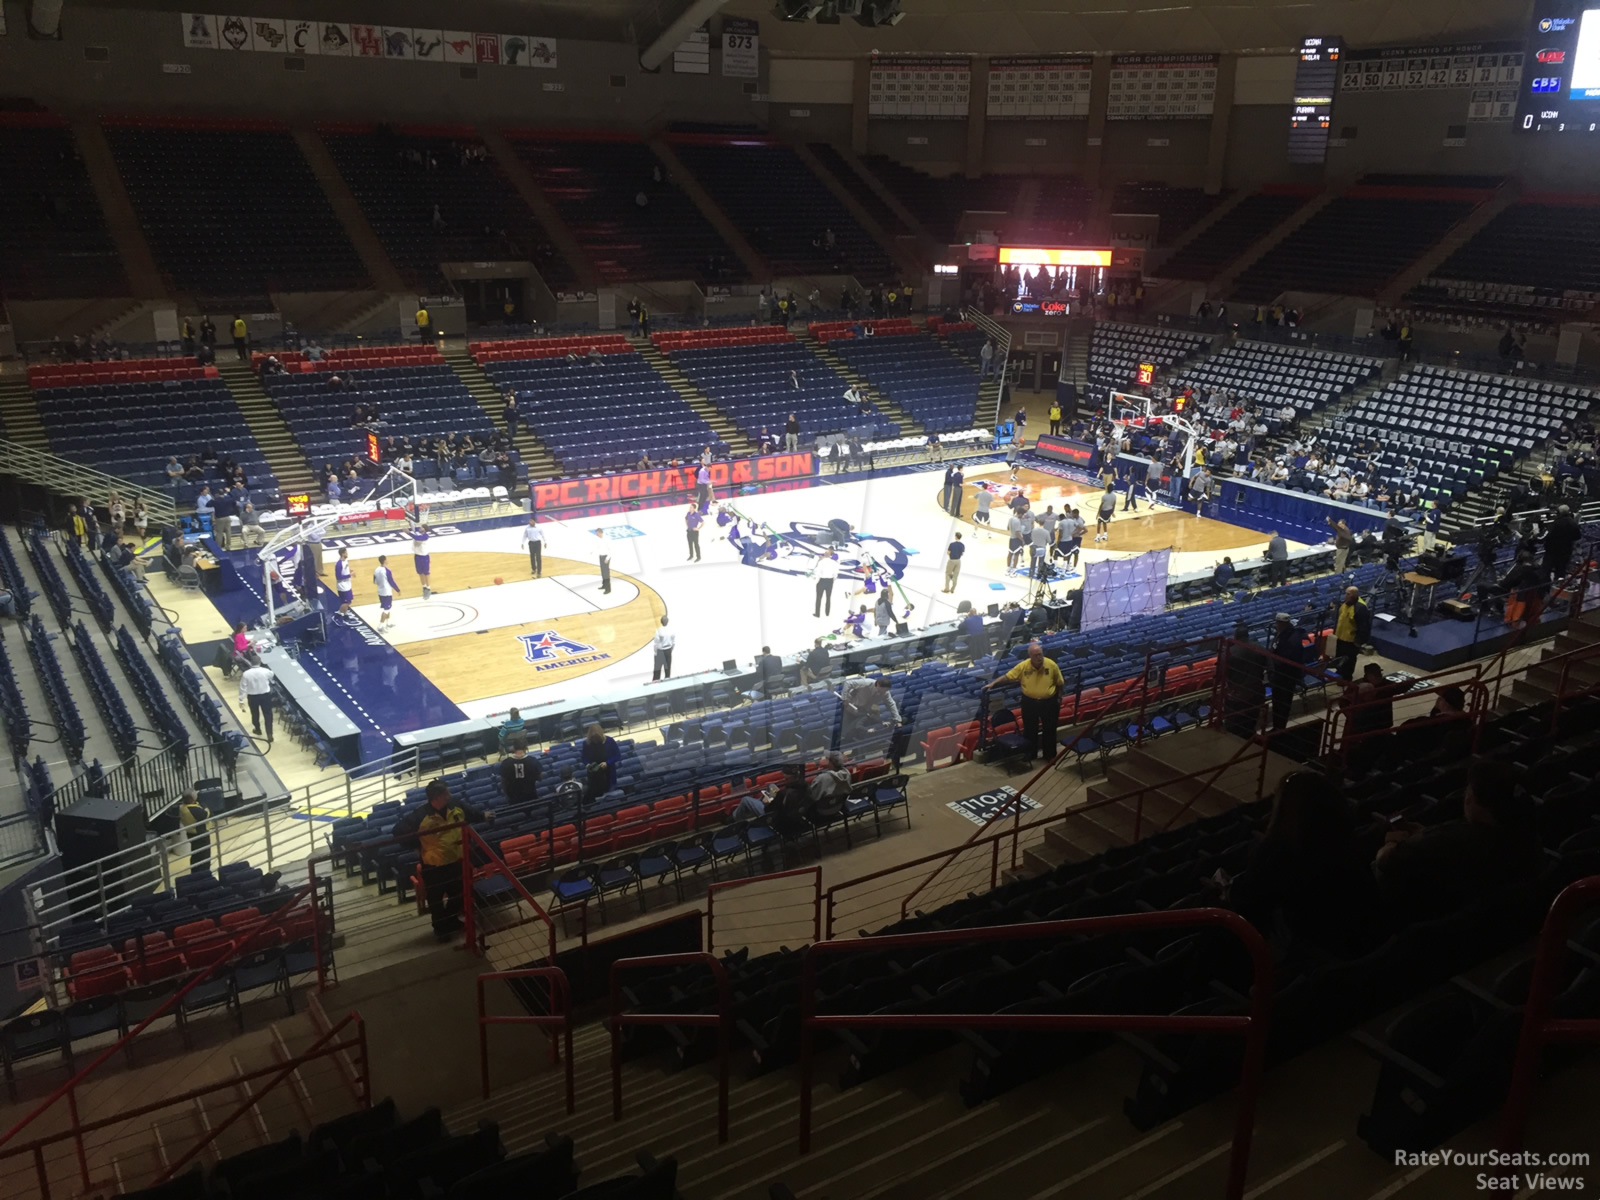 section 212, row 9 seat view  - gampel pavilion